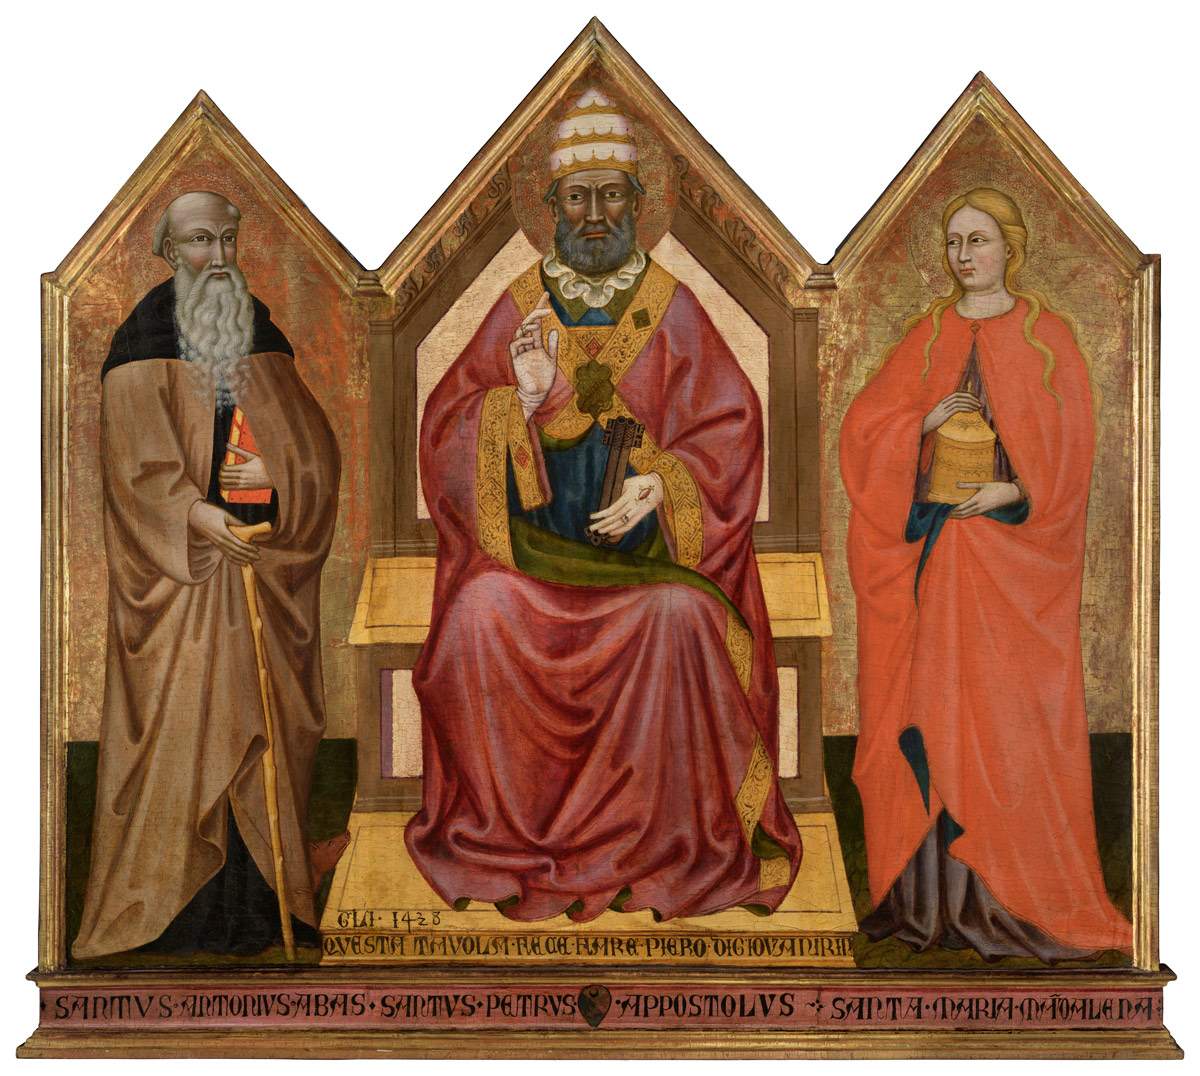 Avenza, a parish attempts a miracle: bringing home a 1438 triptych that left the church centuries ago 